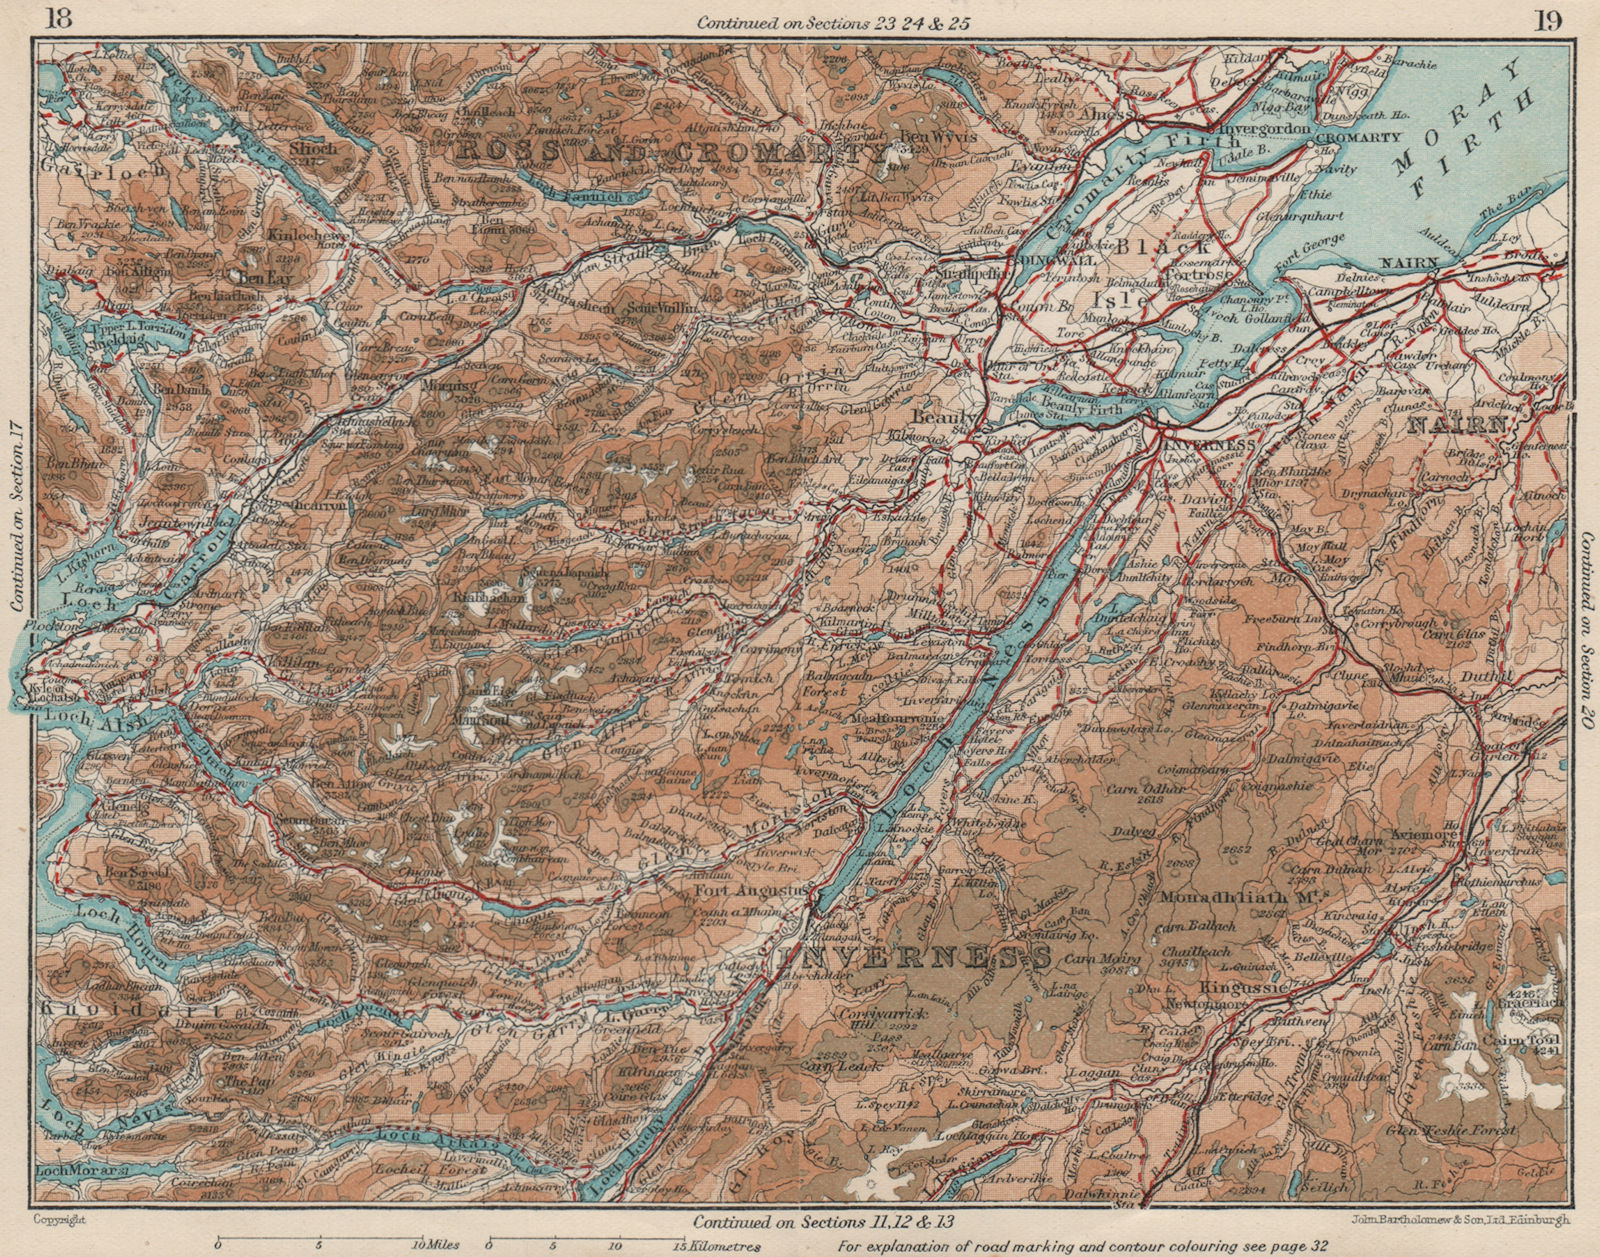 SCOTTISH HIGHLANDS.Ross & Cromarty Inverness-shire Moray Firth.Scotland 1932 map